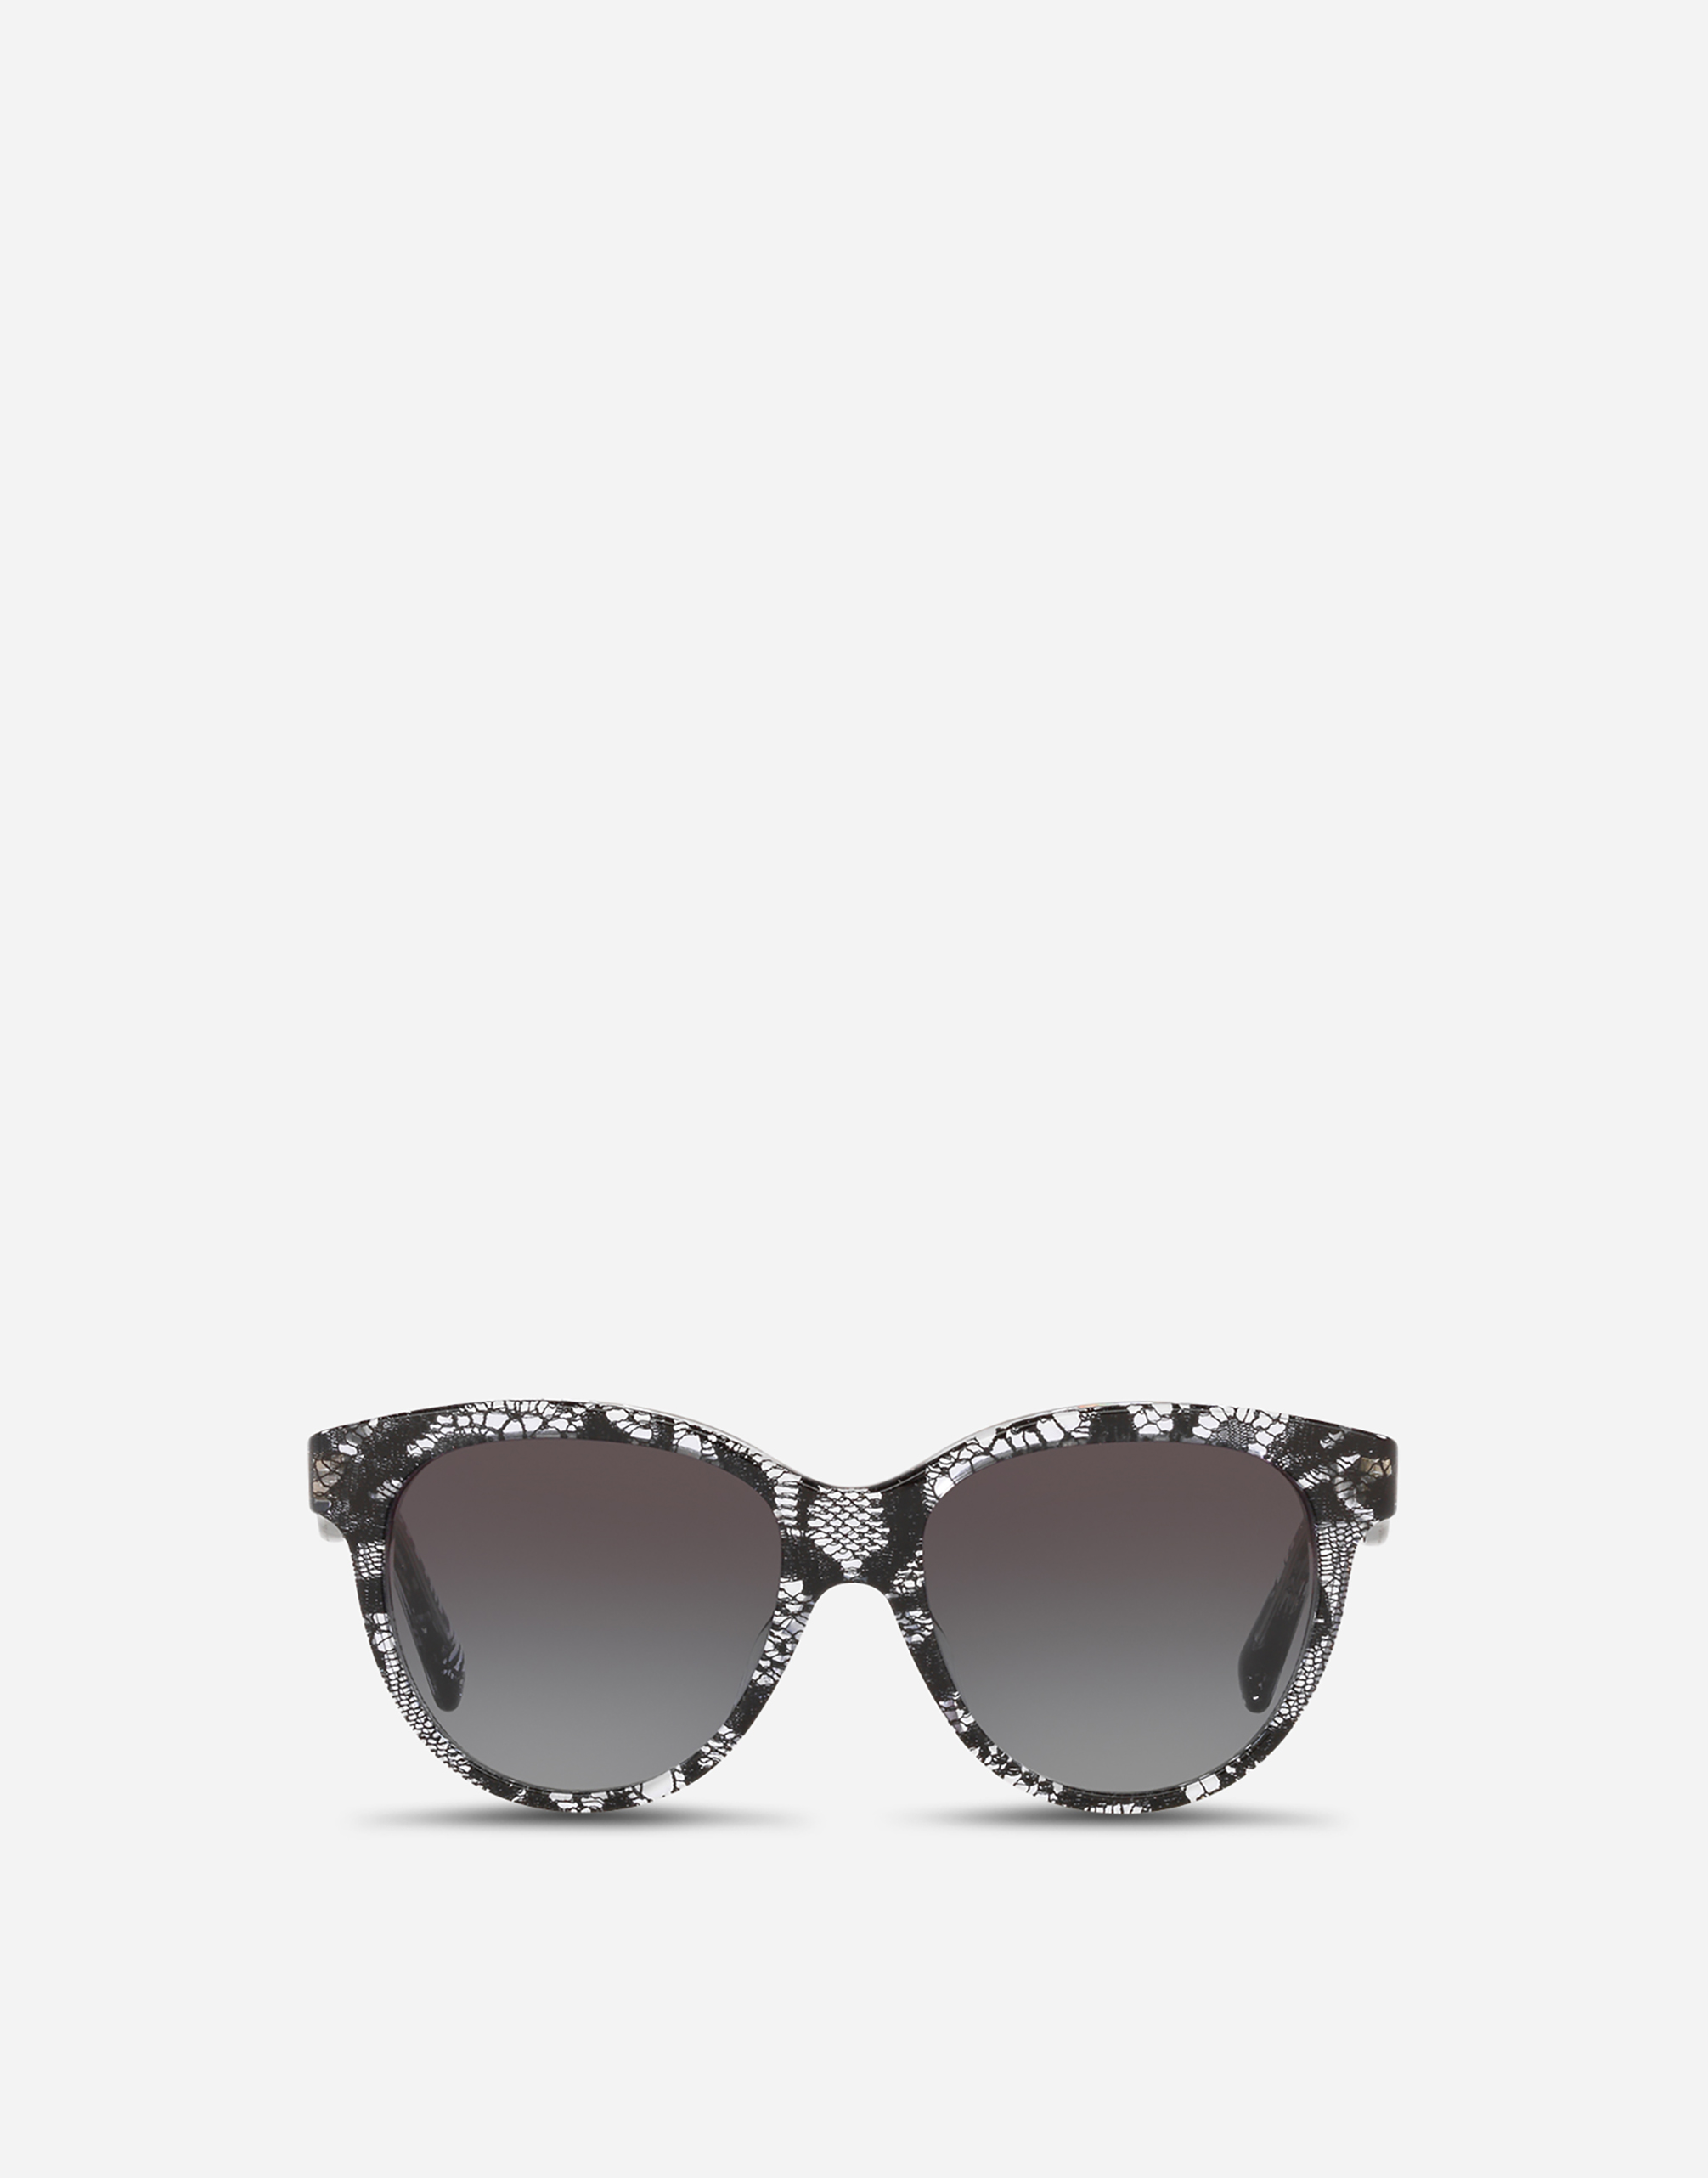 Print family sunglasses in Lace